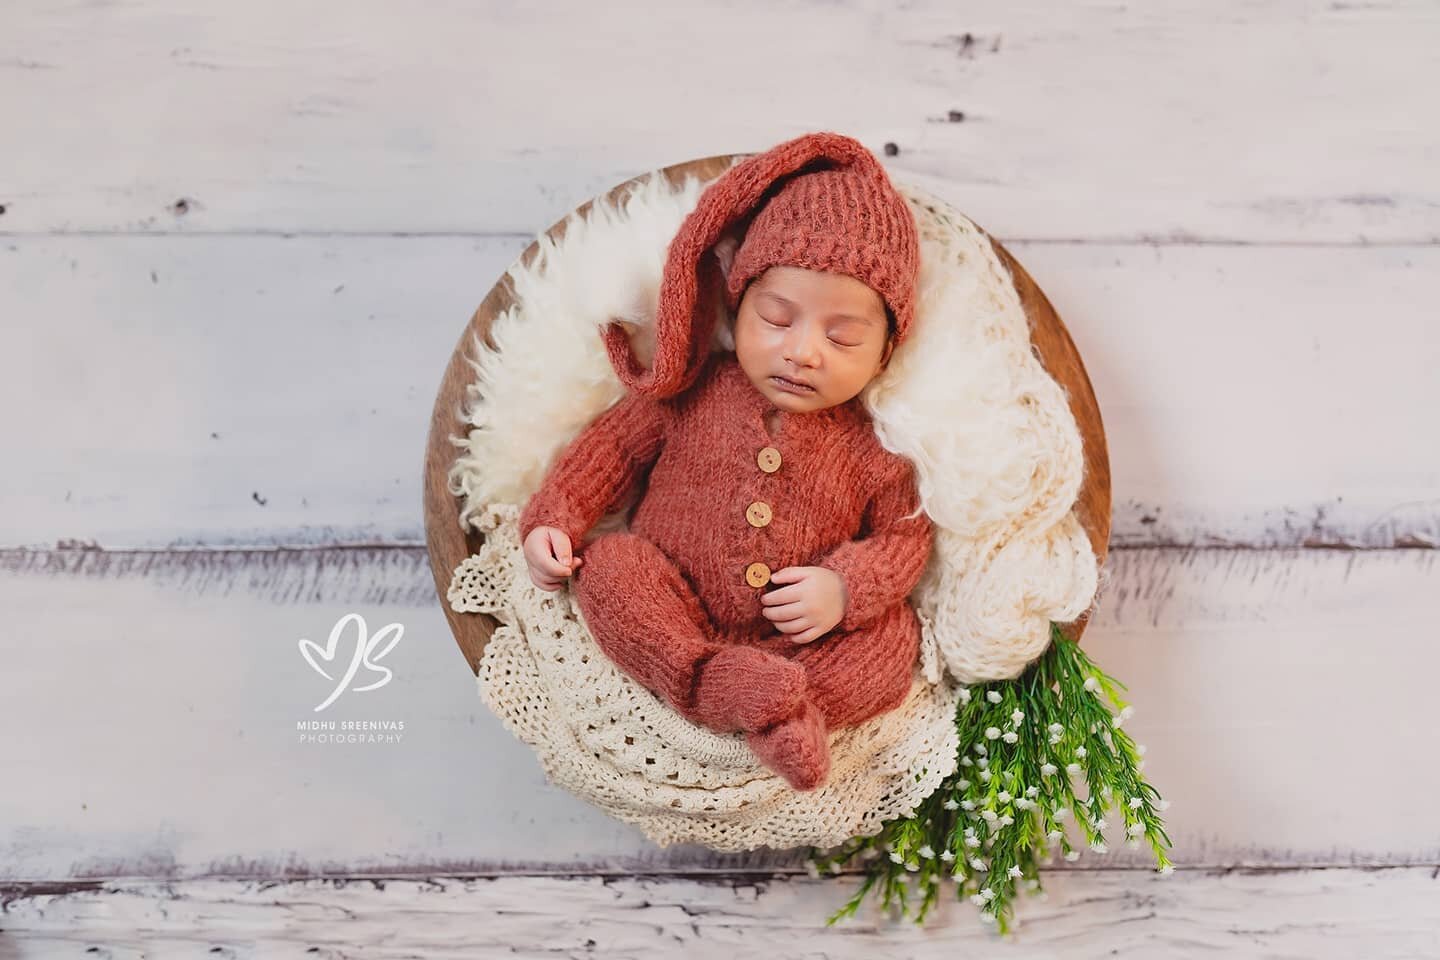 I've always loved adding splashes of colour in newborn photos which I feel splendidly complements our Indian babies! 

What do u think? 

------------------------------------------------

**Note to all new and to-be-parents**

The best time to photog